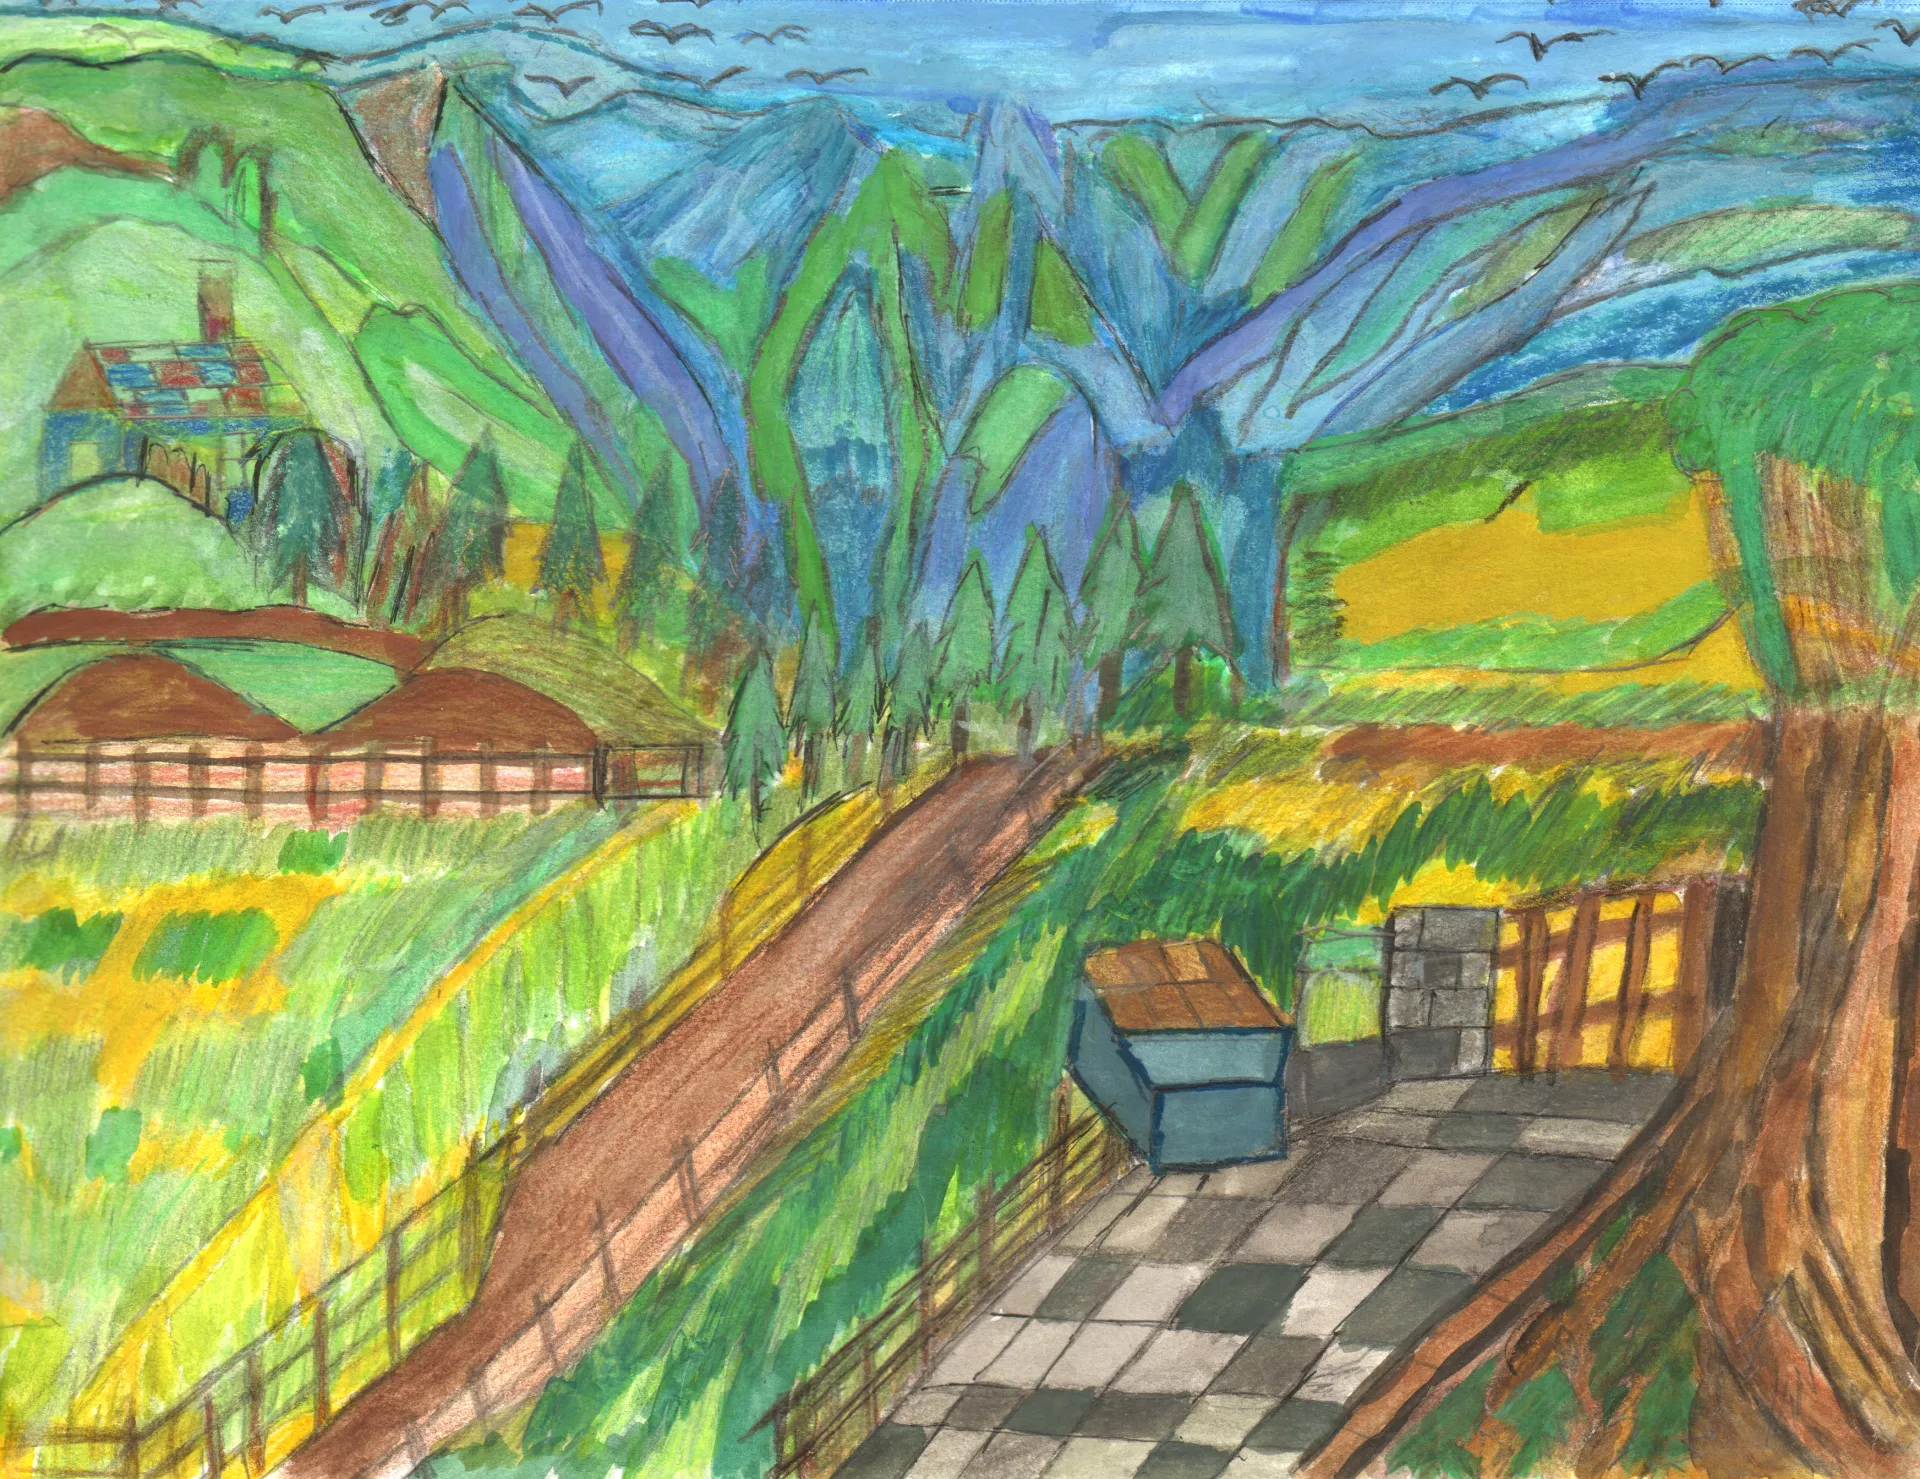 Gino Limjoco Morning Sunrise, 2022 A luscious green landscape with hills, a road, fences, and small buildings.  Mixed media on paper, 9" x 12"